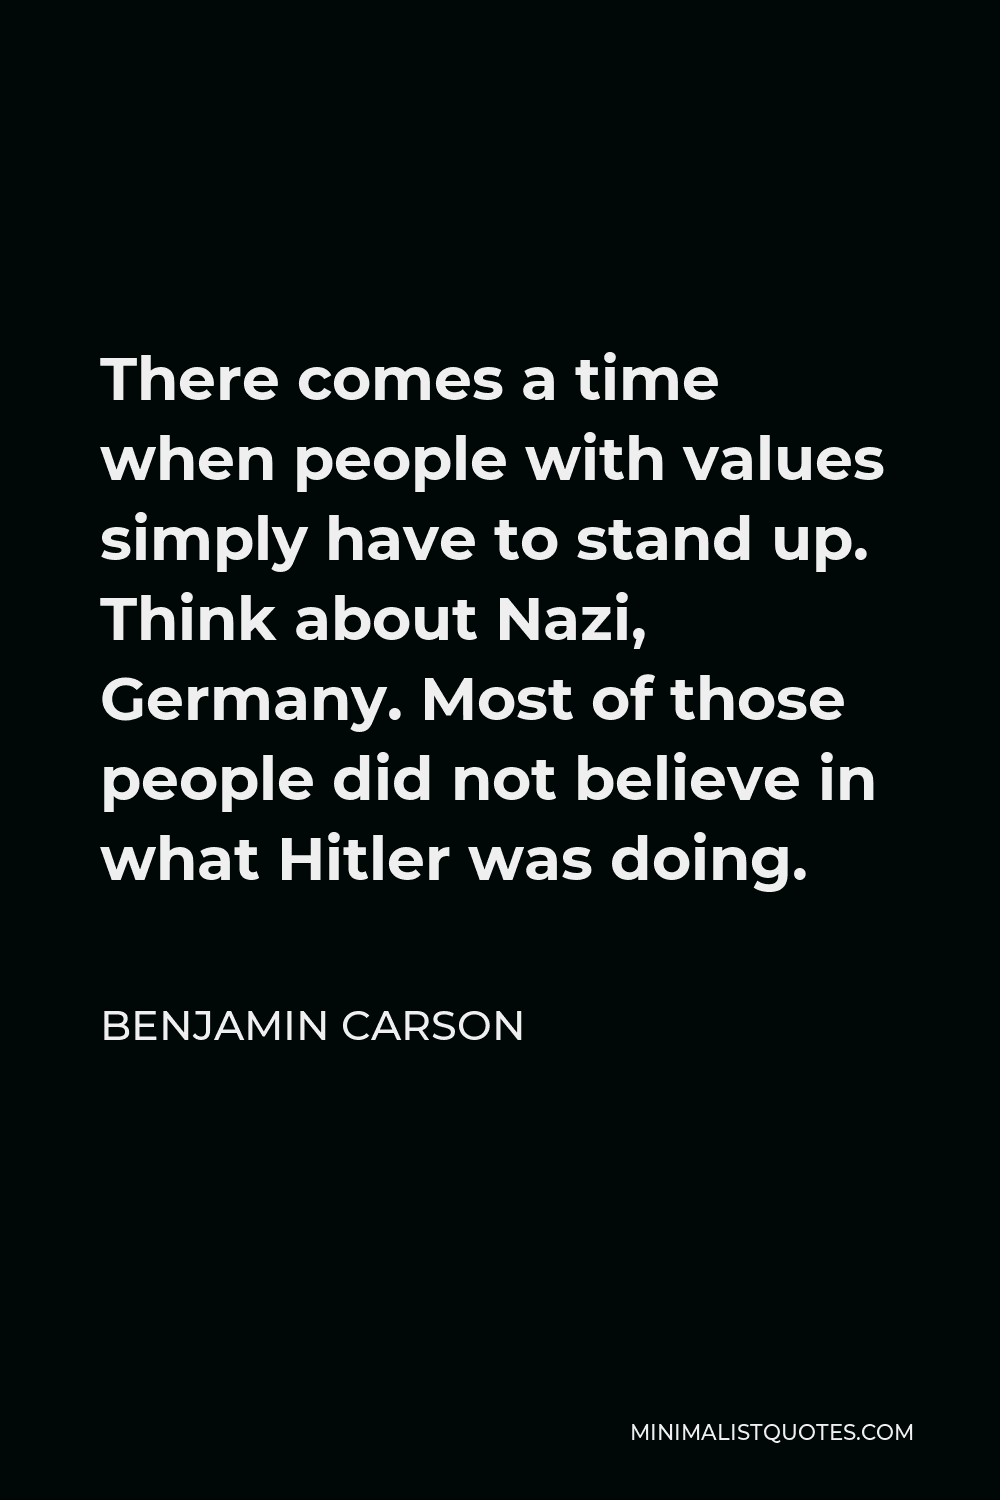 Benjamin Carson Quote - There comes a time when people with values simply have to stand up. Think about Nazi, Germany. Most of those people did not believe in what Hitler was doing.